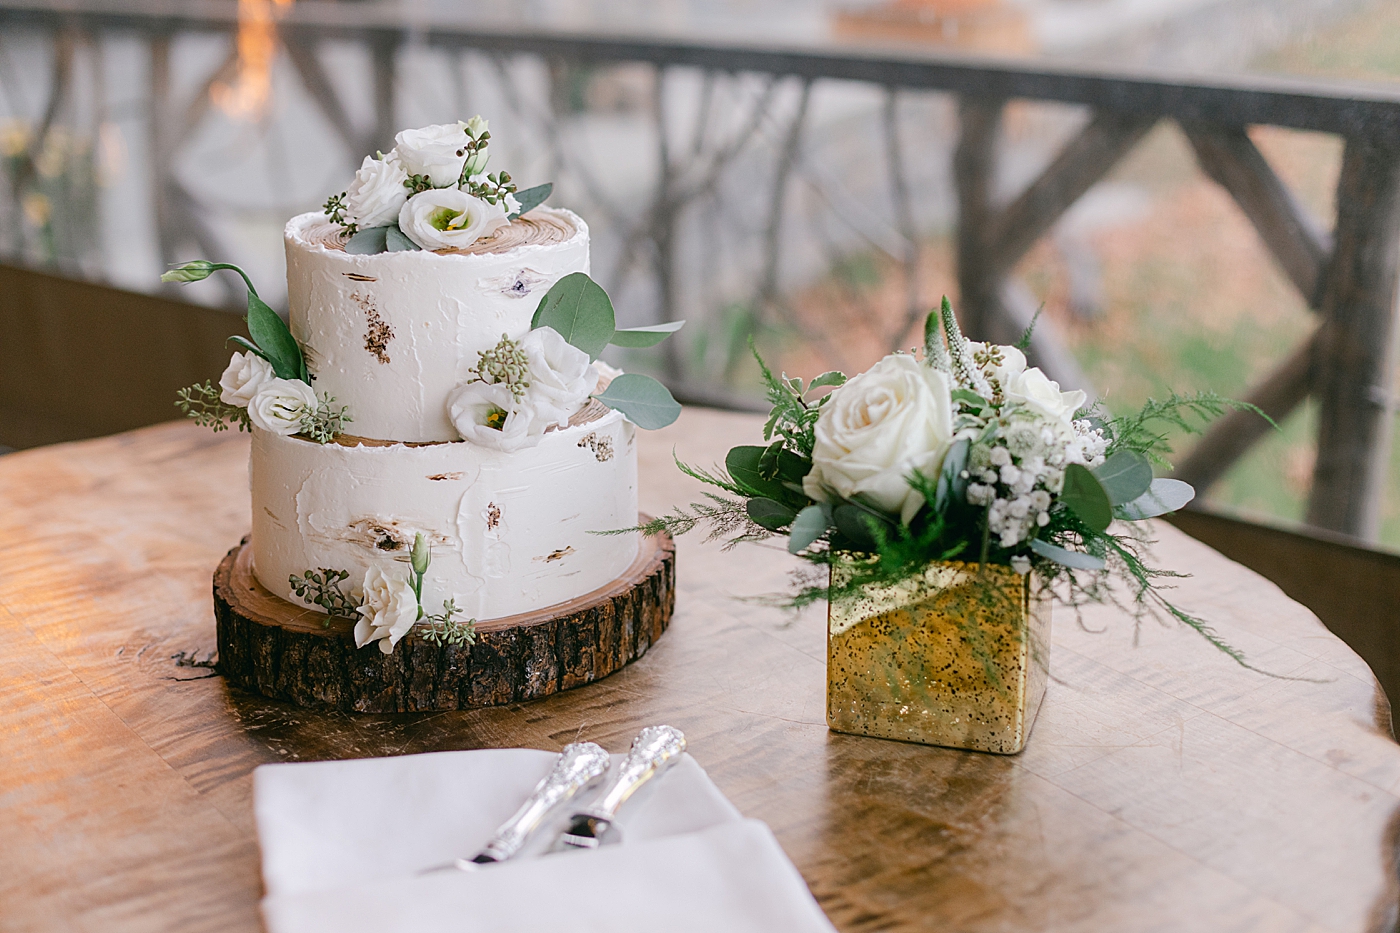 Simple wedding cake with white flowers | Image by Hope Helmuth Photography